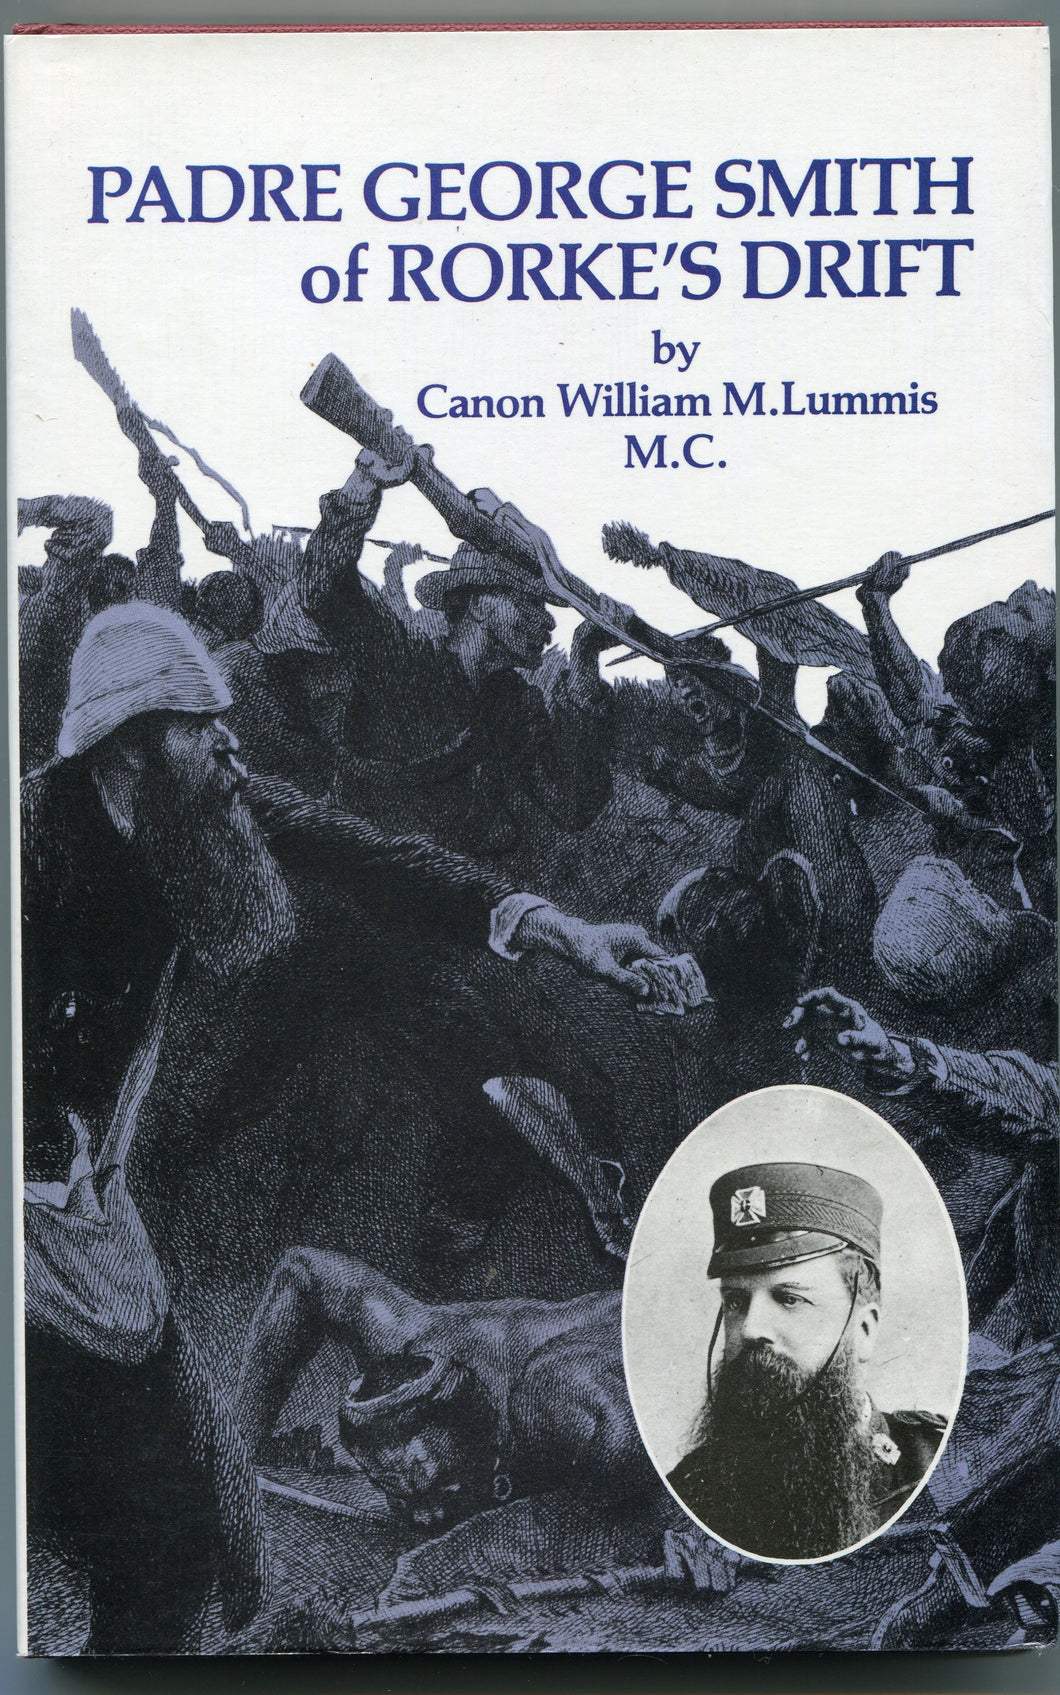 PADRE GEORGE SMITH OF RORKE'S DRIFT, by Canon William Lummis